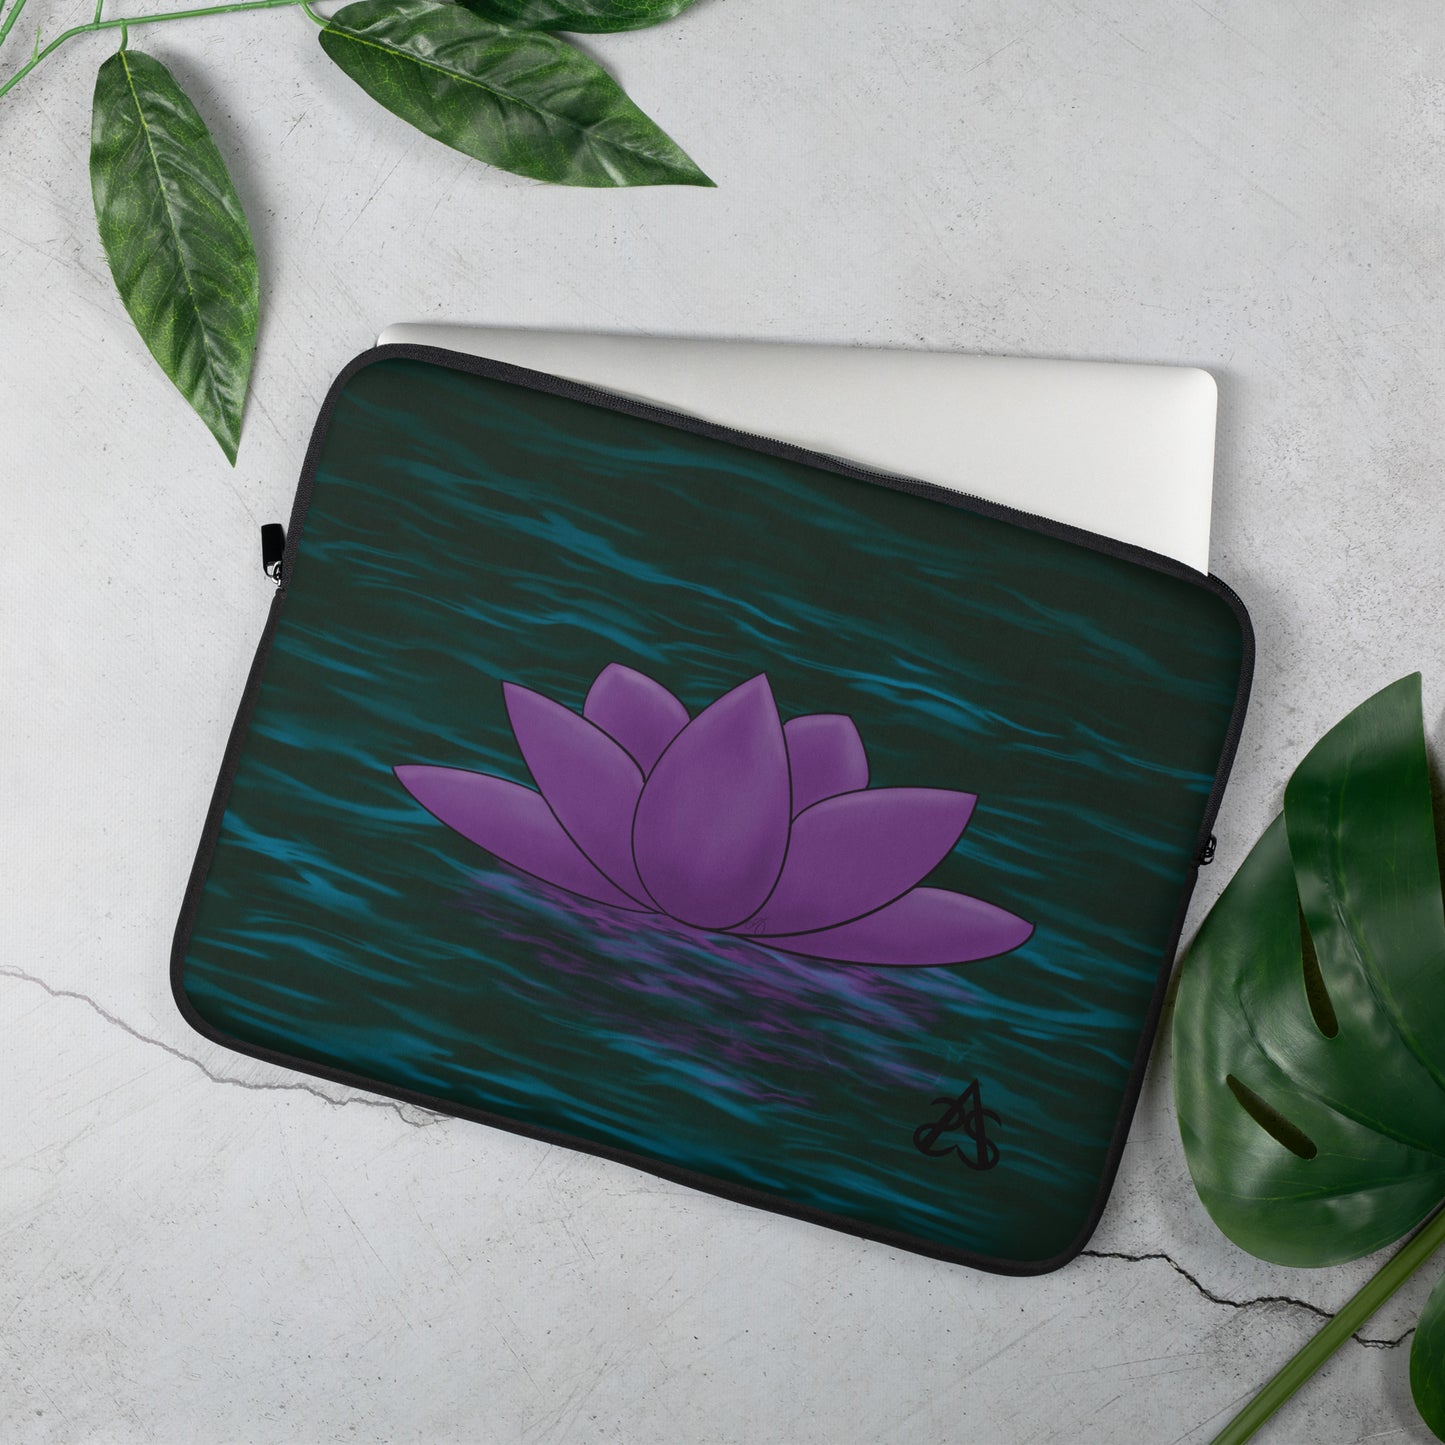 A laptop sleeve with a purple lotus flower on blue-green water.